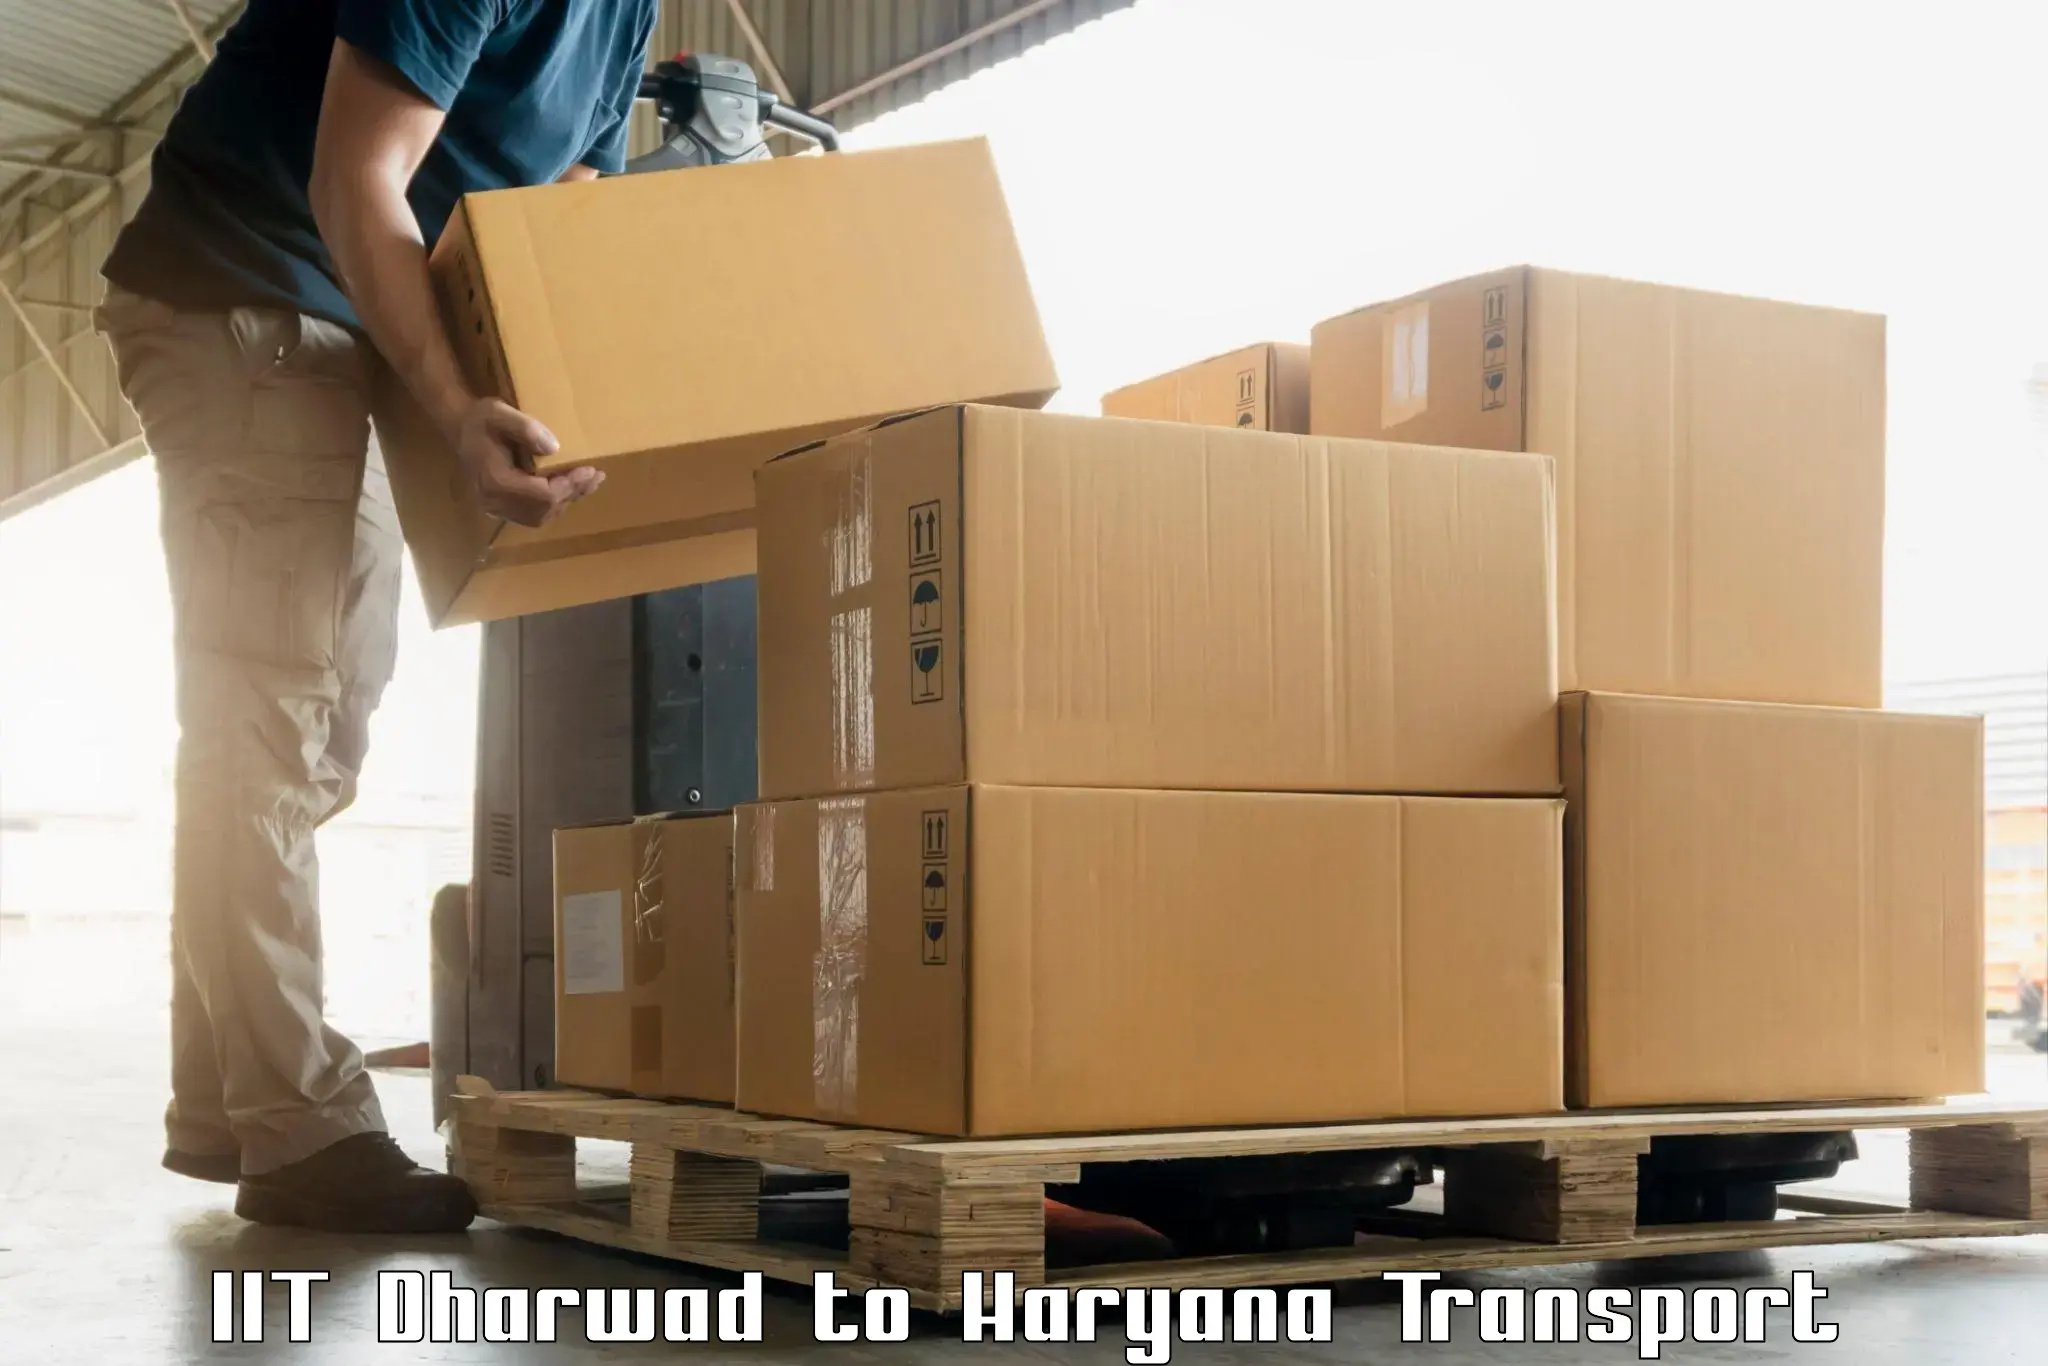 Cargo transport services IIT Dharwad to Fatehabad